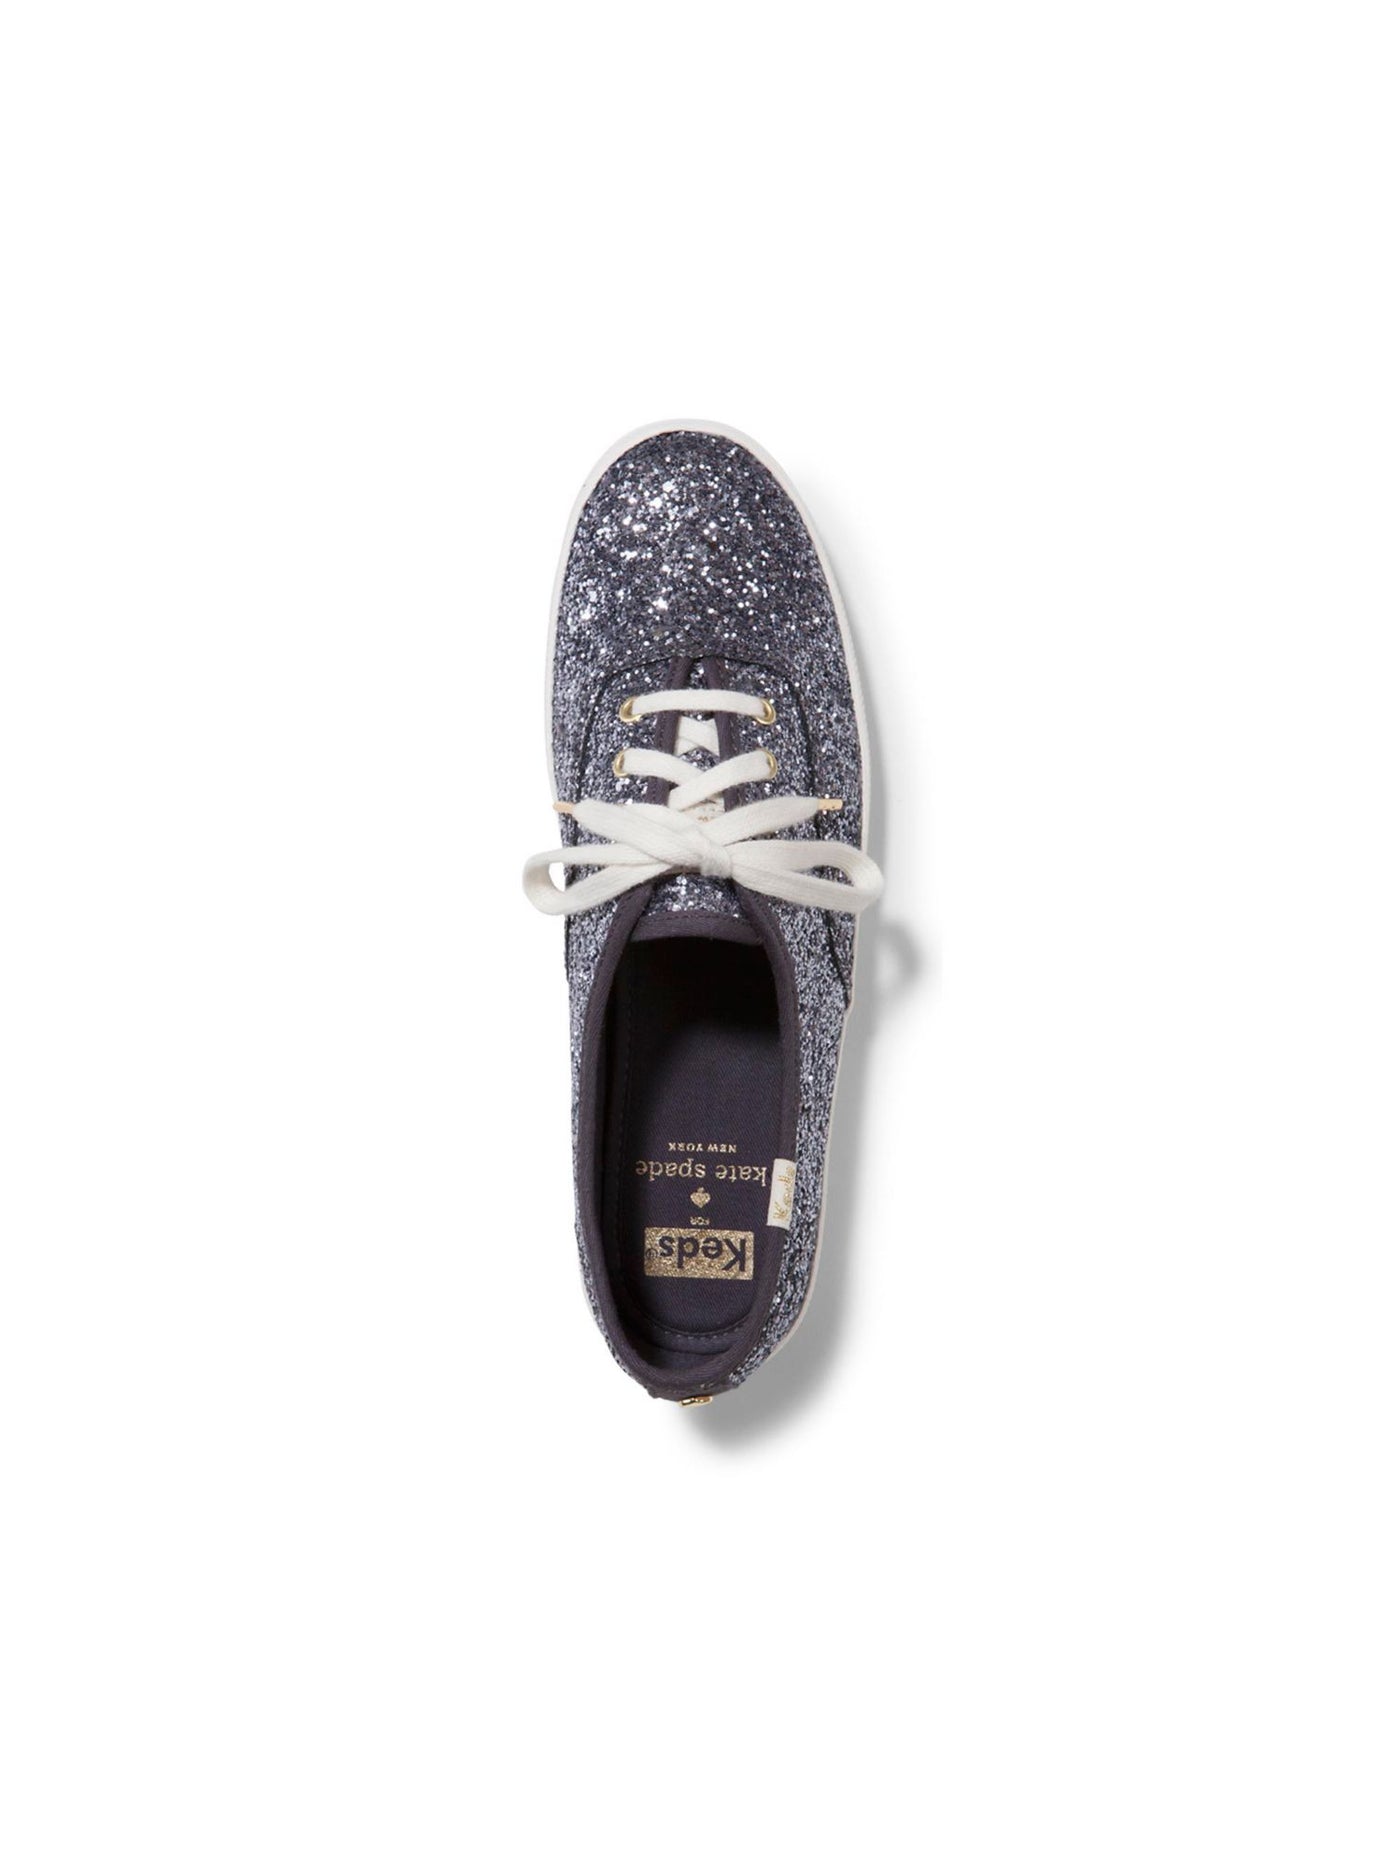 KATE SPADE NEW YORK Womens Gray Glitter Logo Breathable Cushioned Glitter Round Toe Platform Lace-Up Athletic Sneakers Shoes 5.5 M